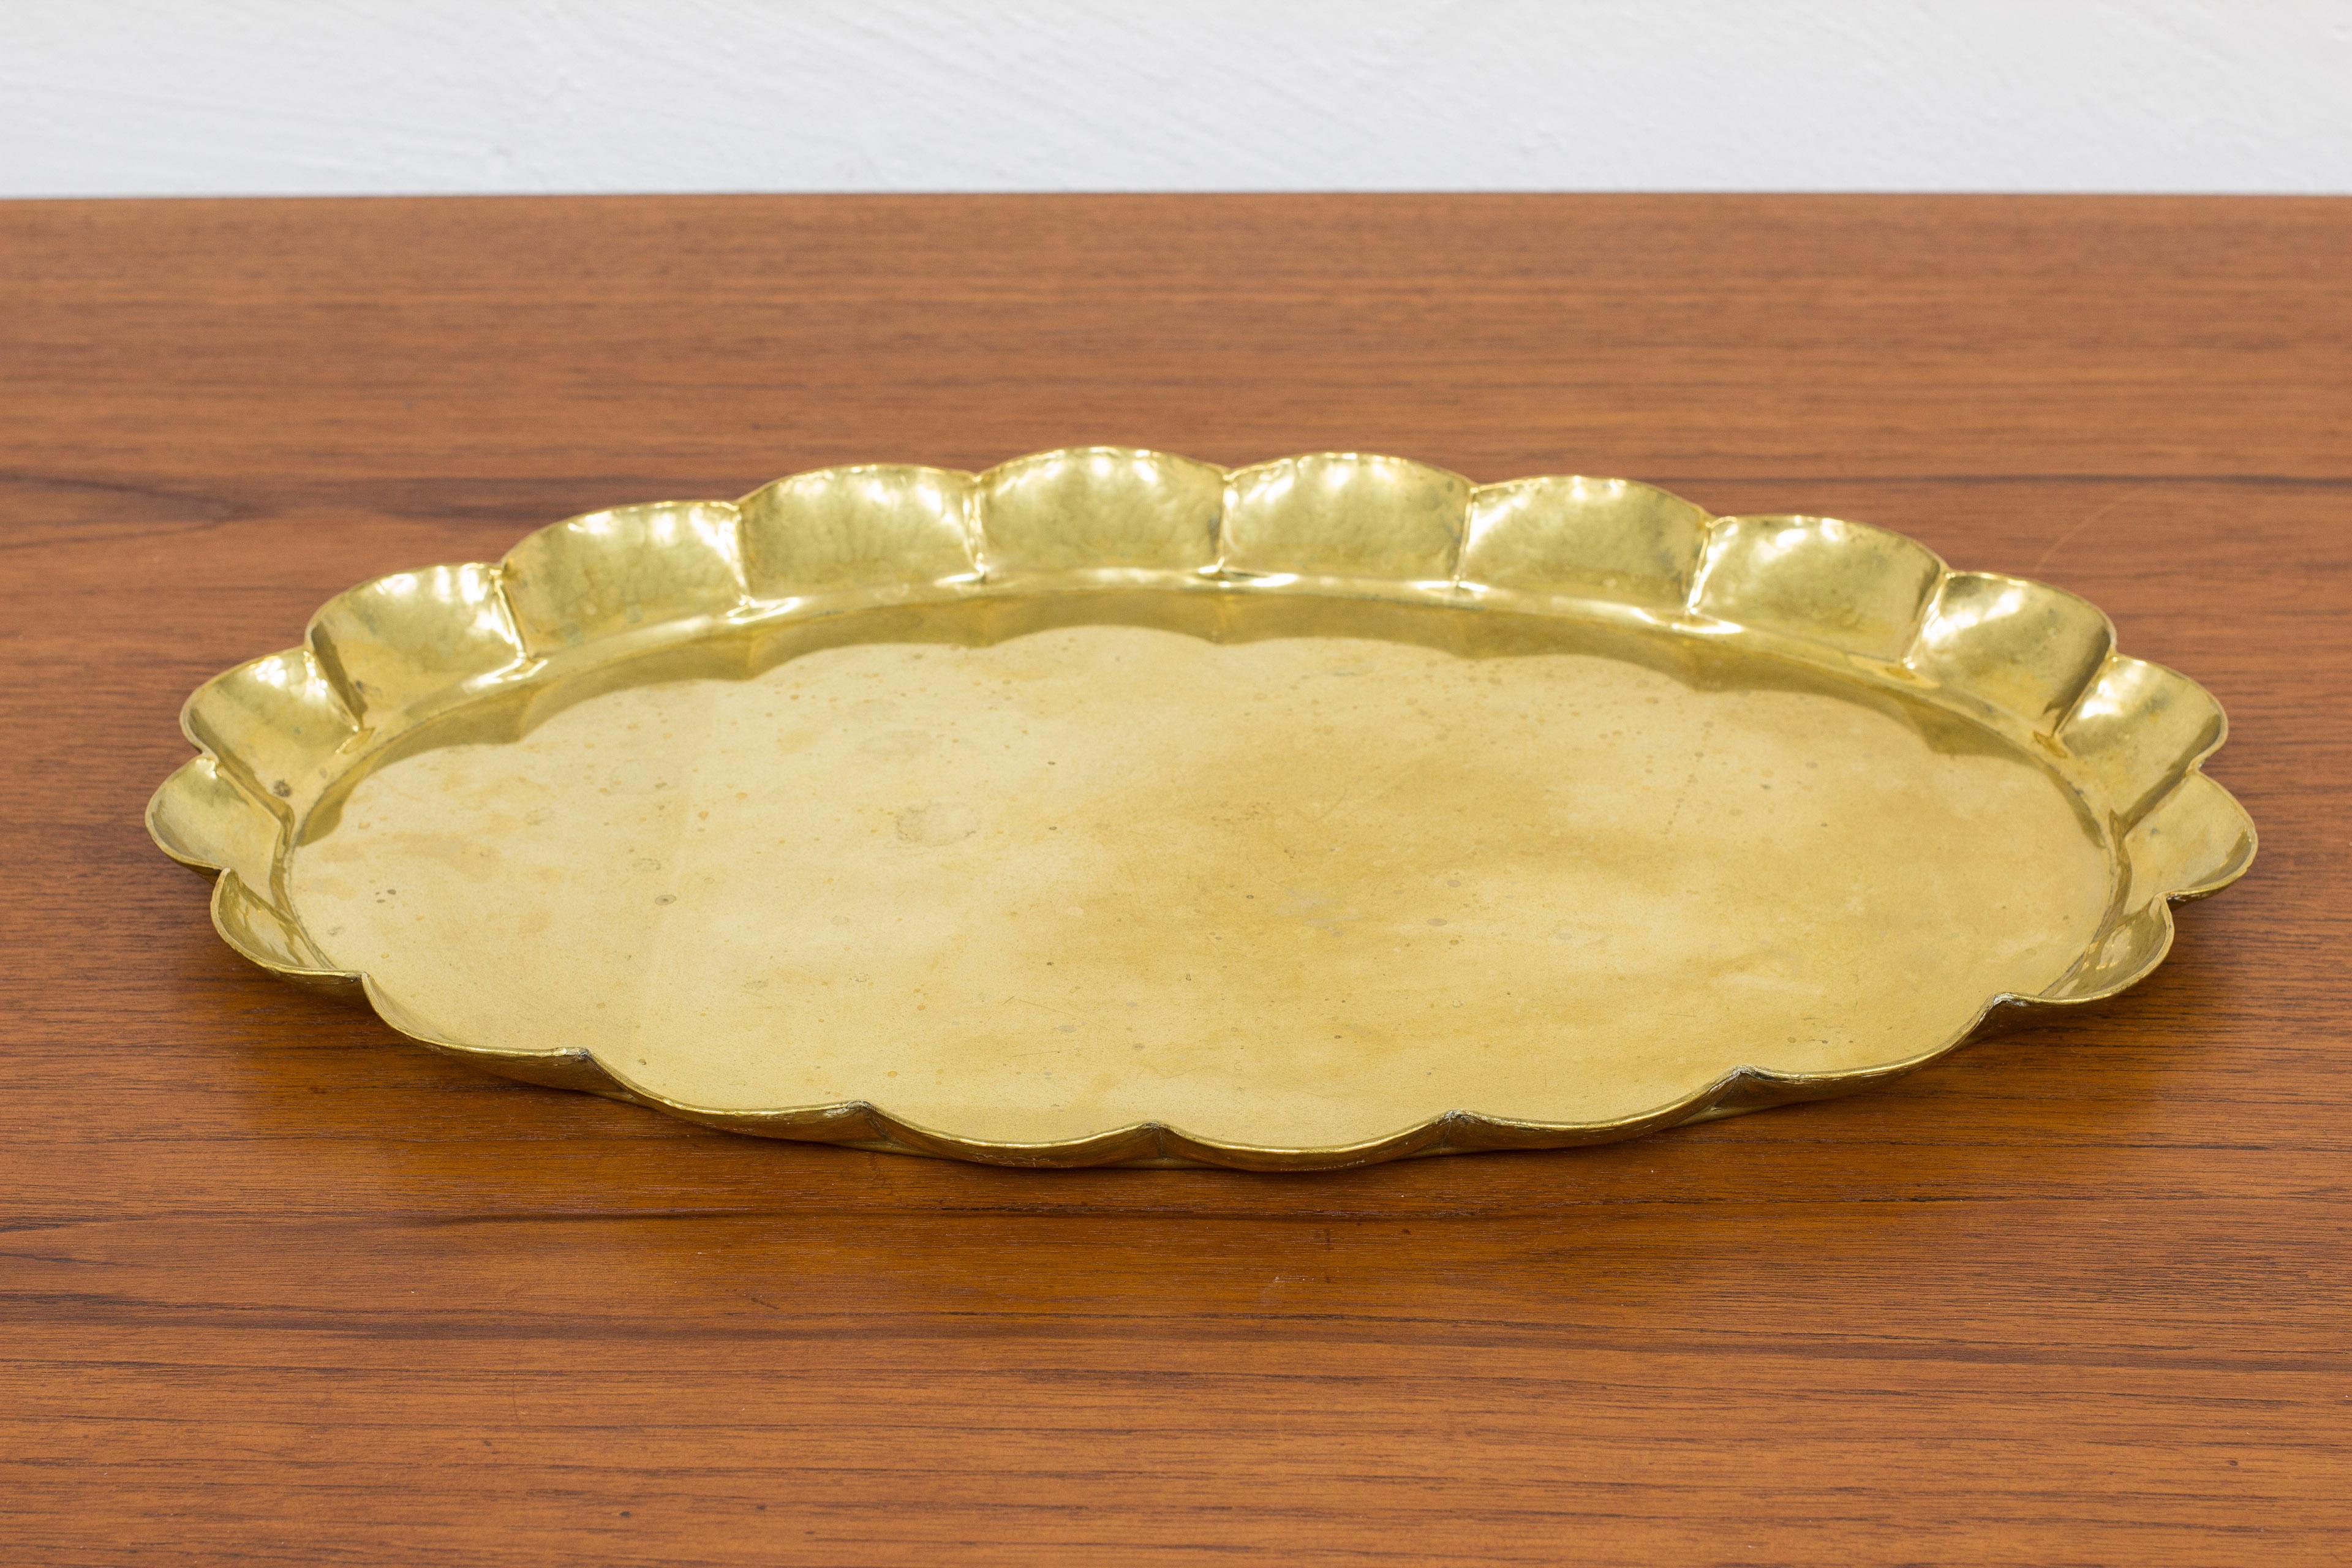 Hand made brass tray made by Lars Holmström. Produced by his own workshop Arvika Konsthantverk during the 1940s. Made from solid brass with patina. Very good vintage condition with few signs of age related wear and patina.

Lars Holmström was a